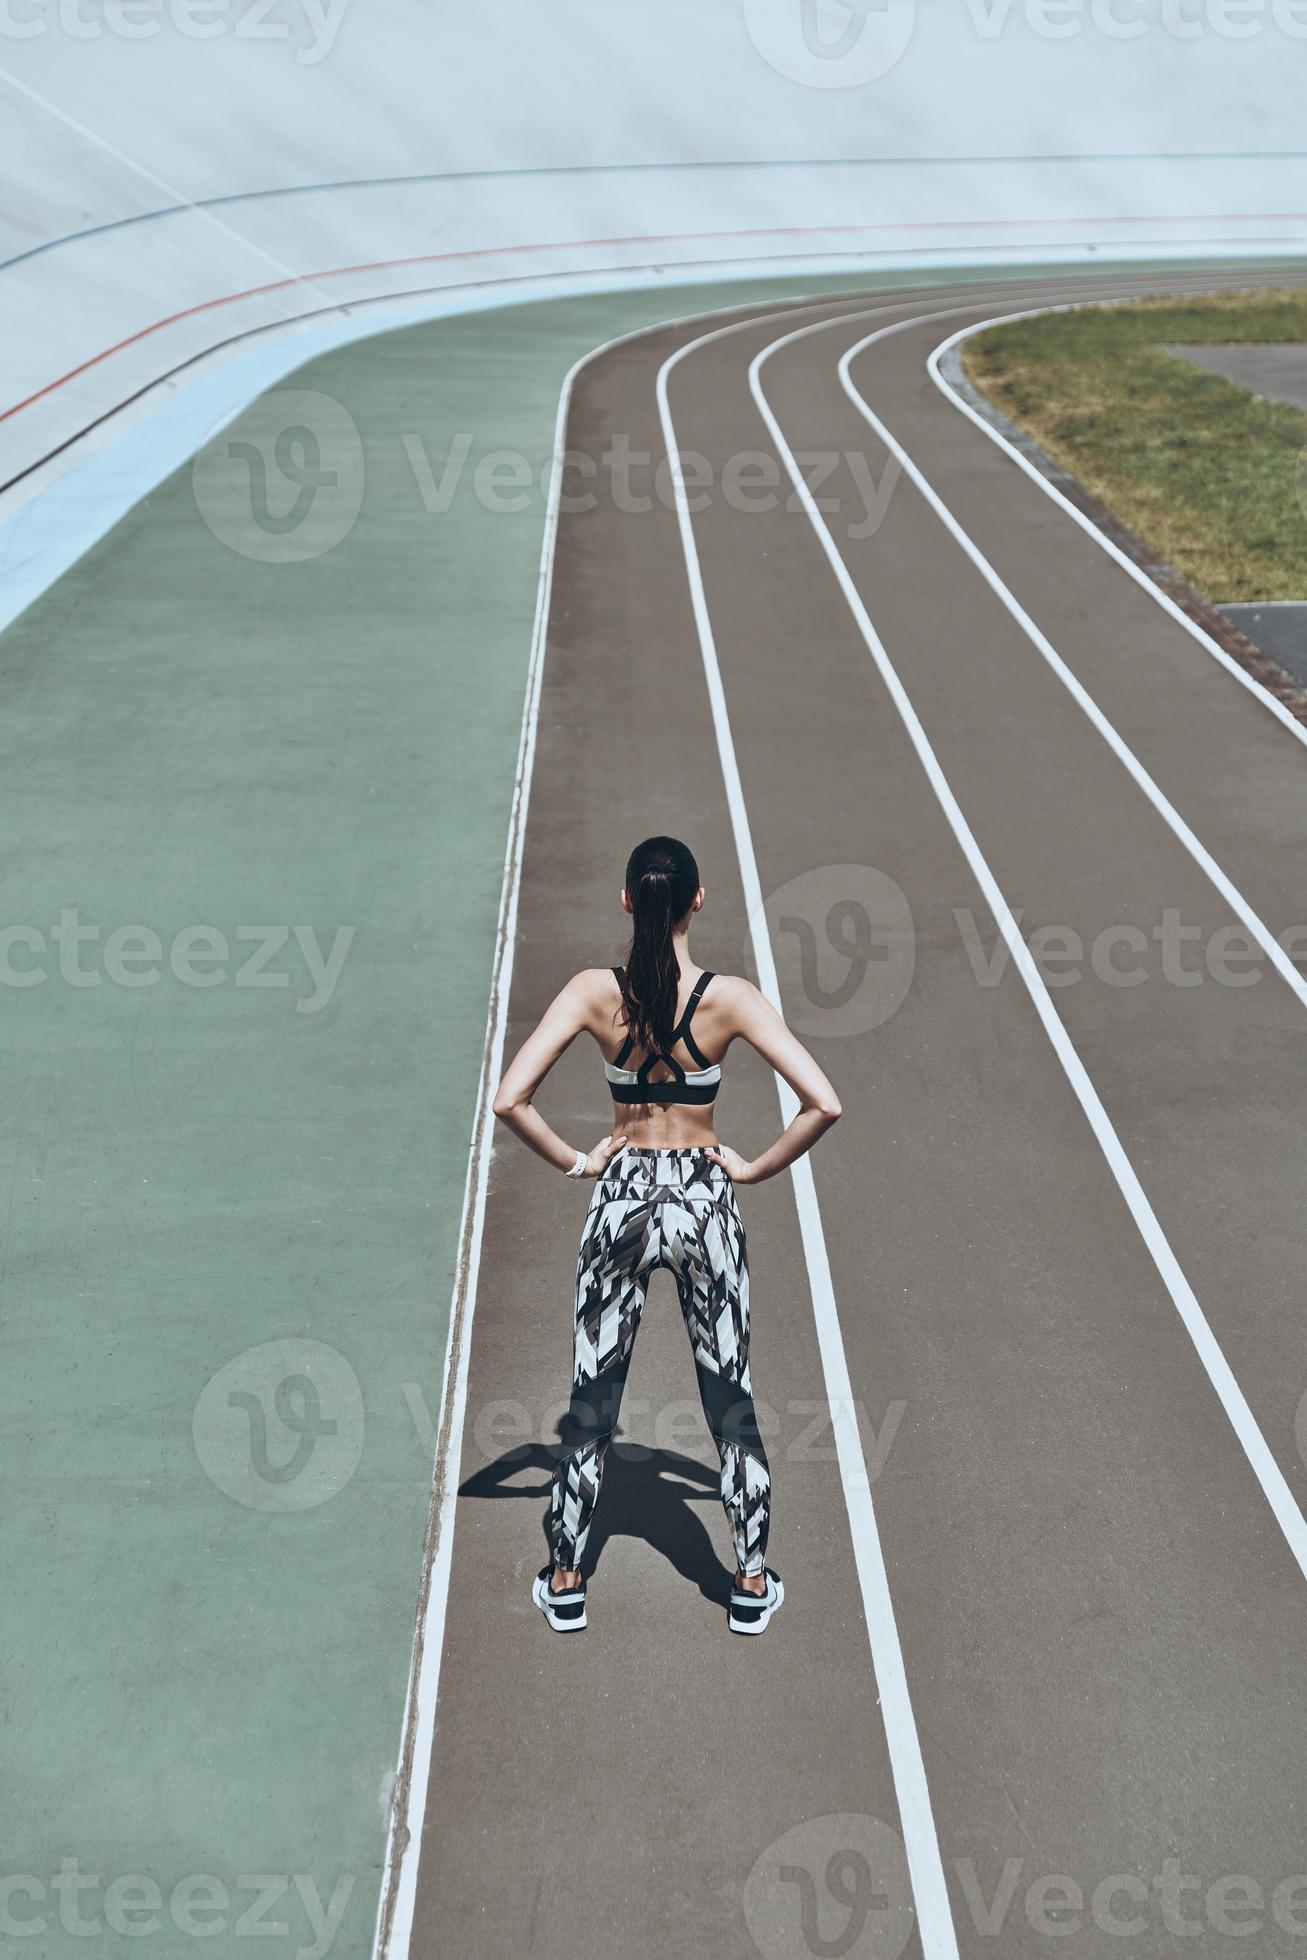 Woman athlete in fitness attire standing on running track with